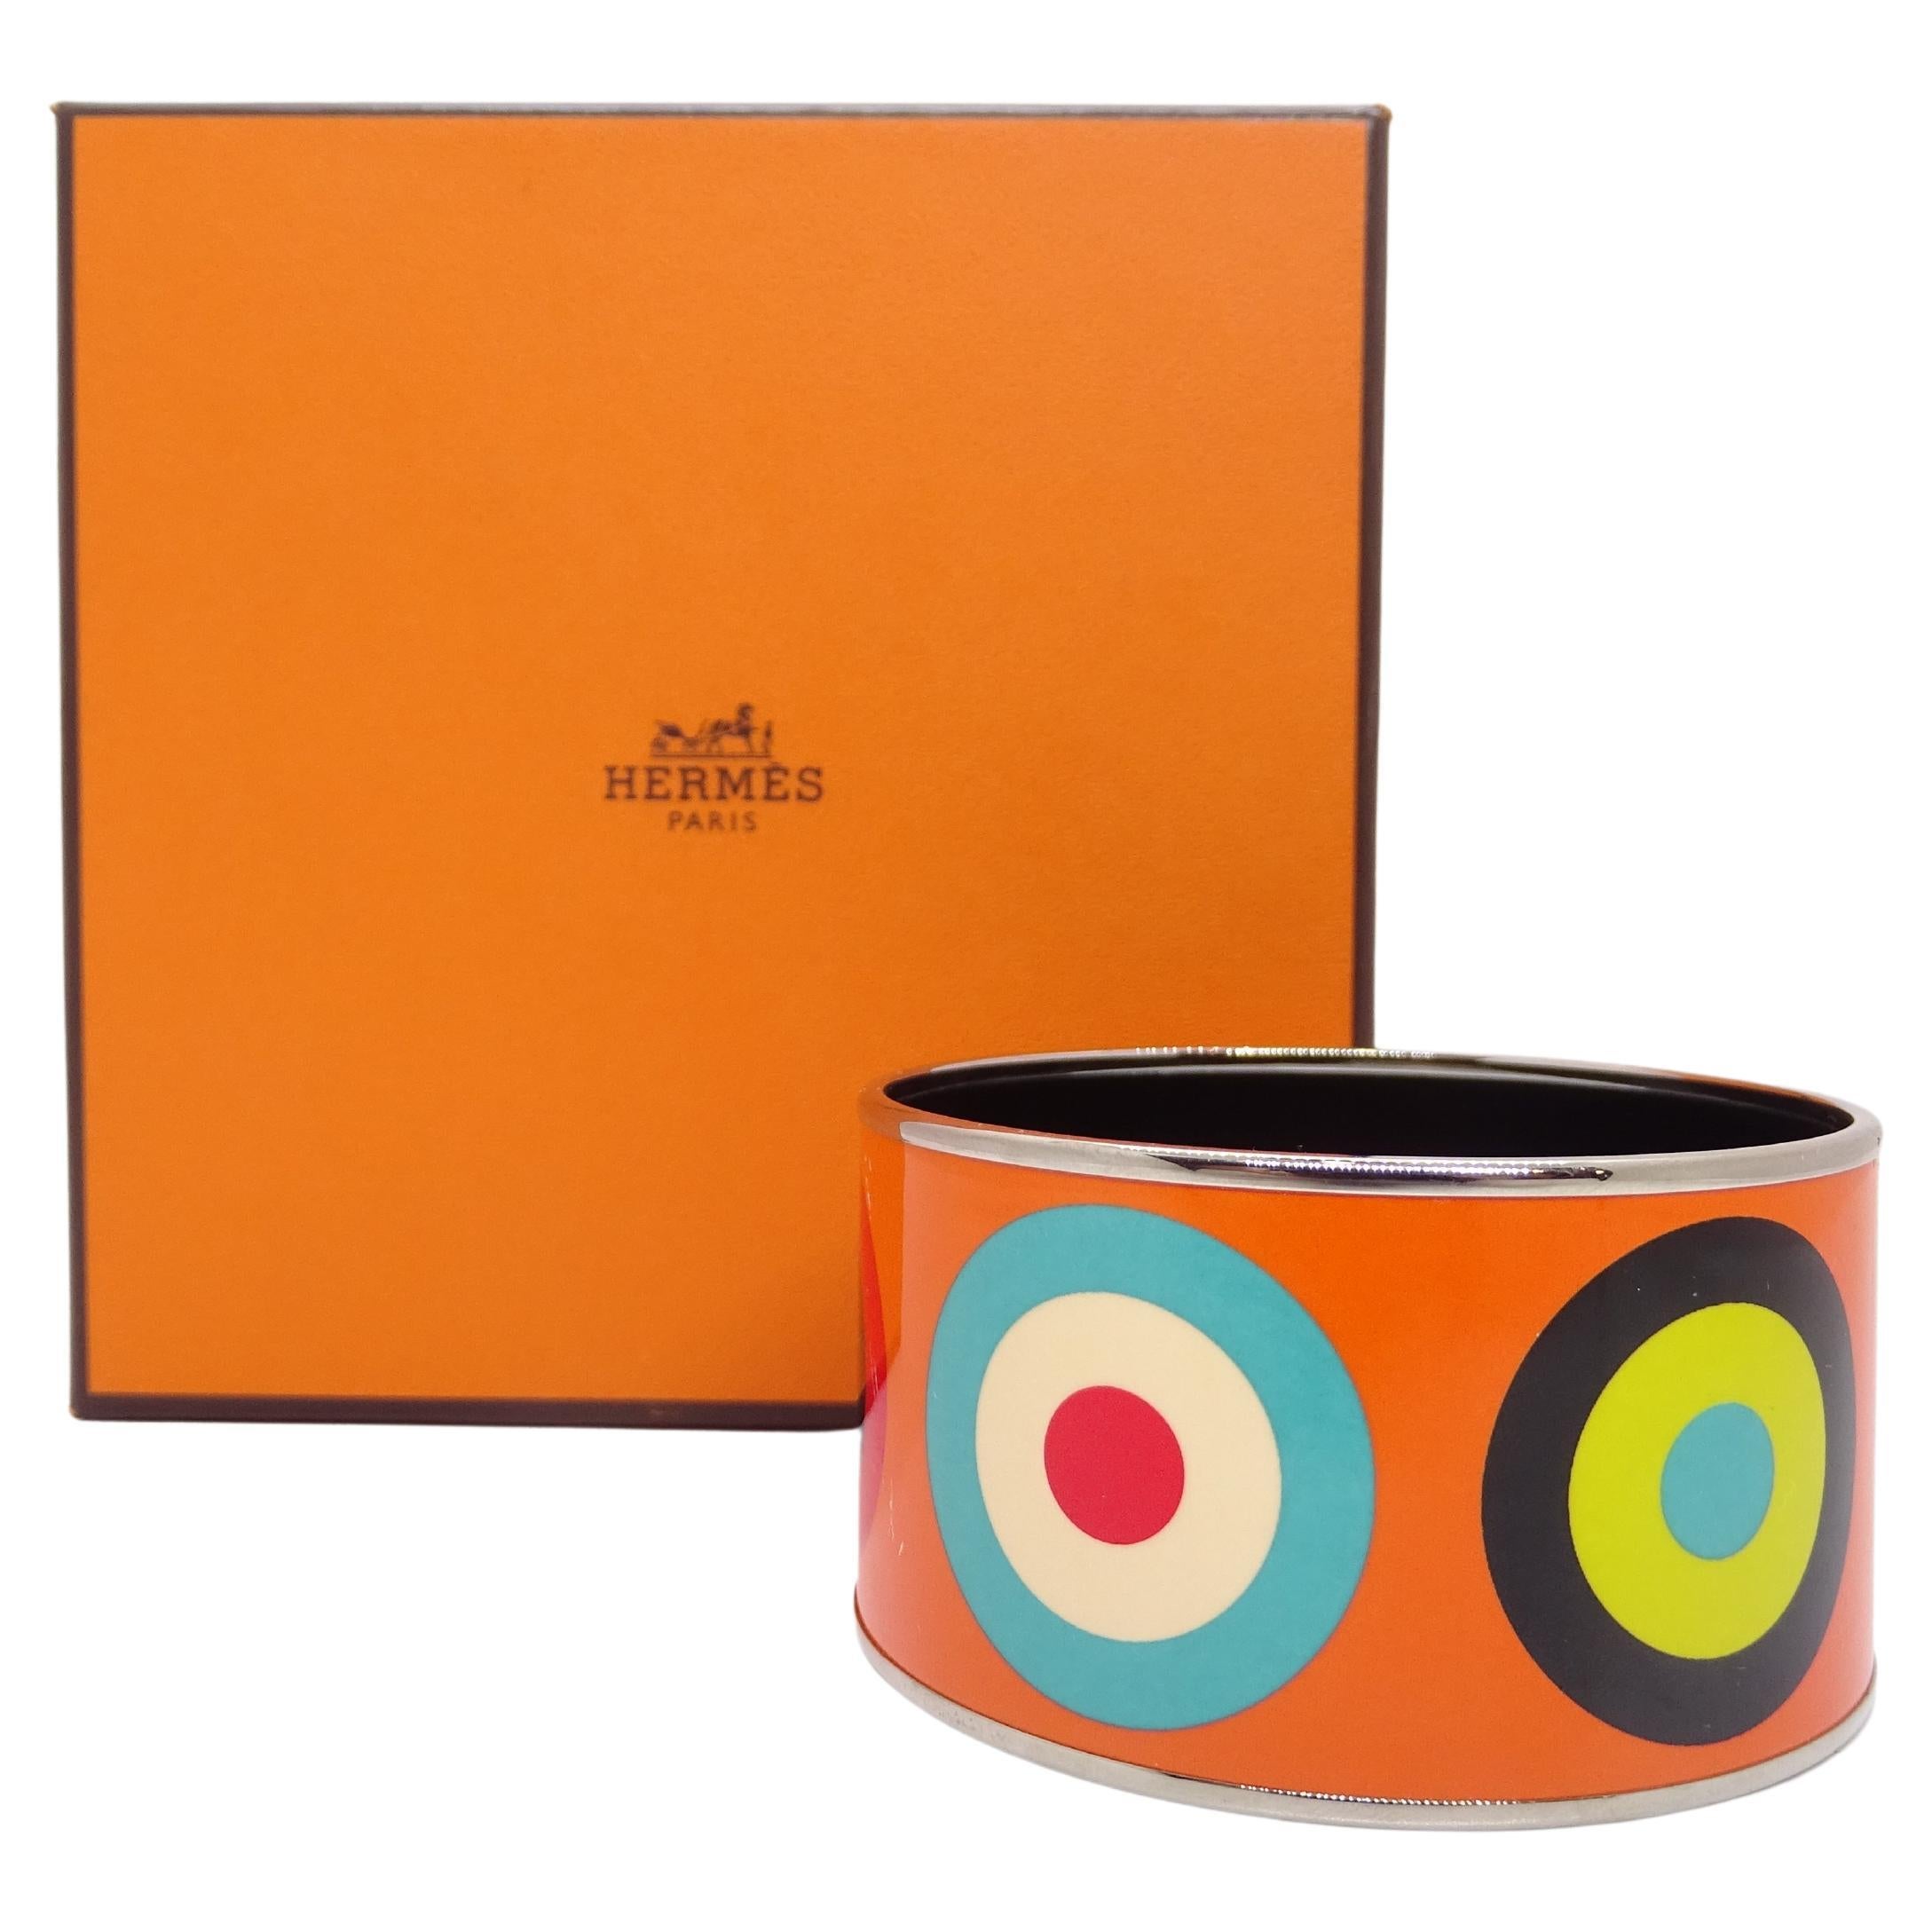  Outstanding Hermès bracelet, s. XXI – France

Gorgeous  bracelet from the French house Hermes in palladium silver and enamel. Colorful circle design on the Hermès orange background. These concentric circles in beige, red, black, blue and green on